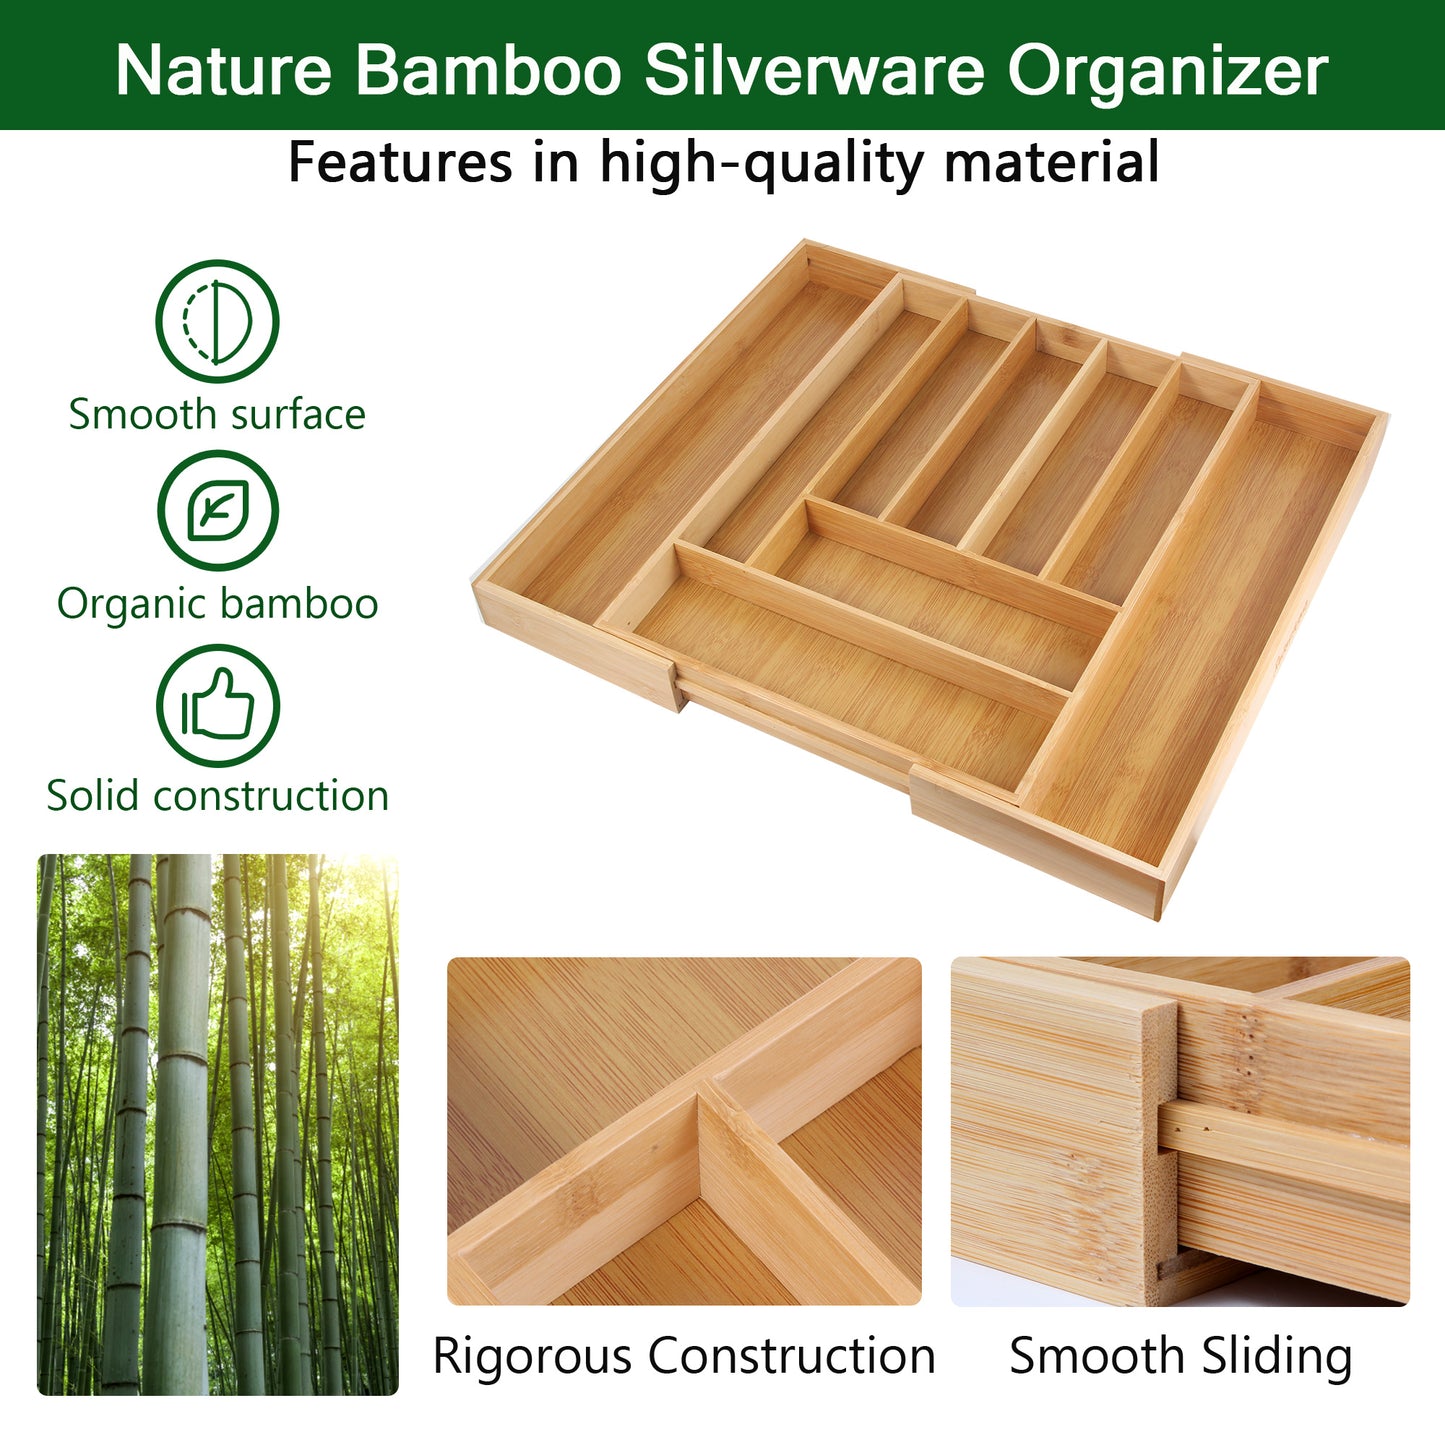 isheTao Bamboo Expandable Kitchen Drawer Organizer, Kitchen Drawer Organizer for Large Utensils, Silverware Organizer, Adjustable Cutlery Tray with Grooved Drawer Dividers for Silverware, Flatware